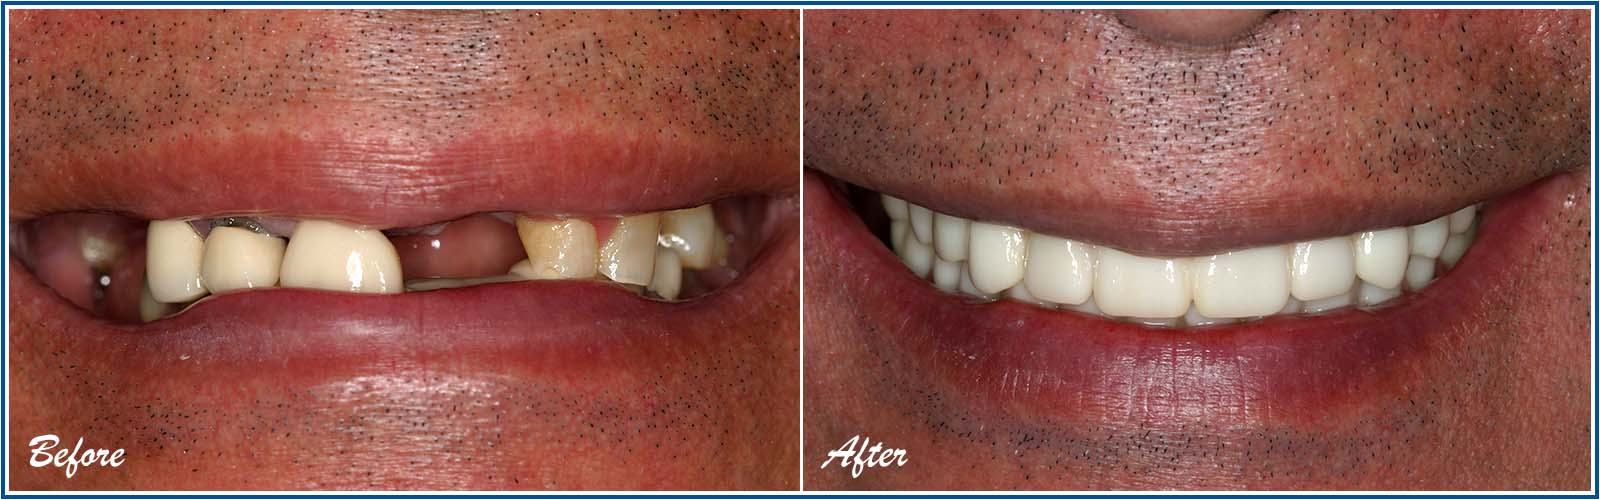 all on x dental implants before and after